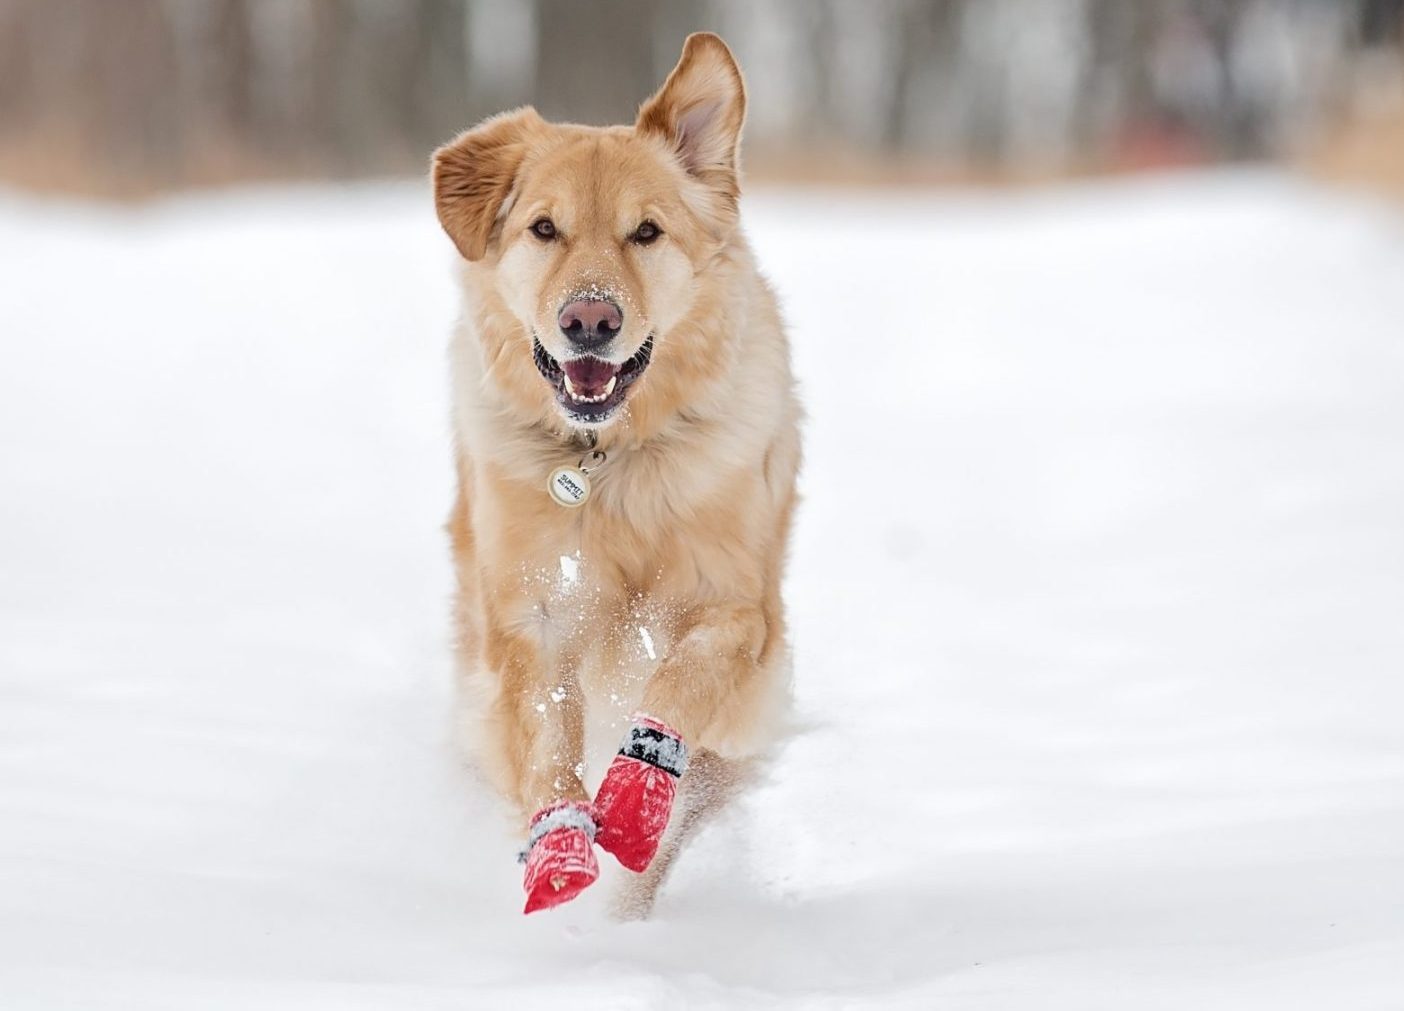 How Can I Take Care of My Pet’s Paws in the Winter?